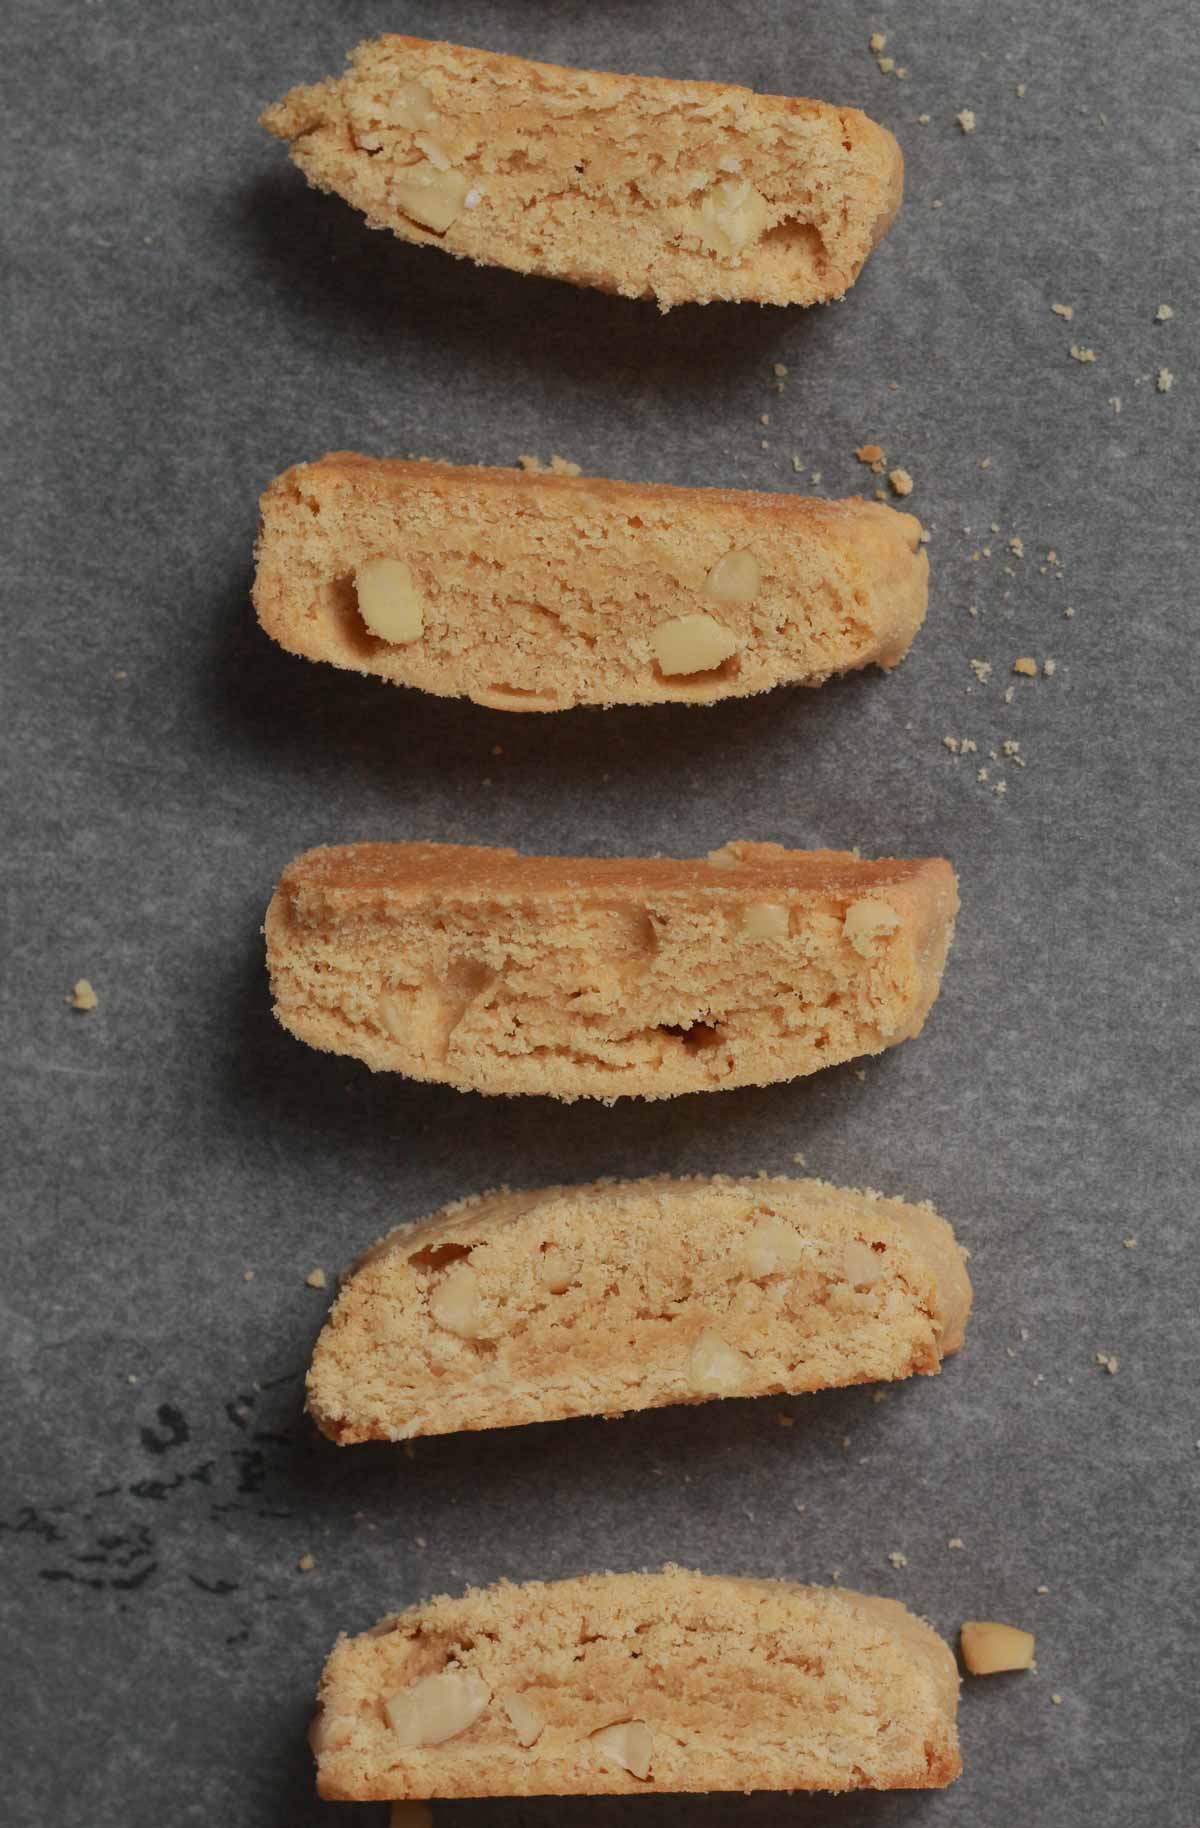 Slices Of Half Baked Biscotti On Baking Tray